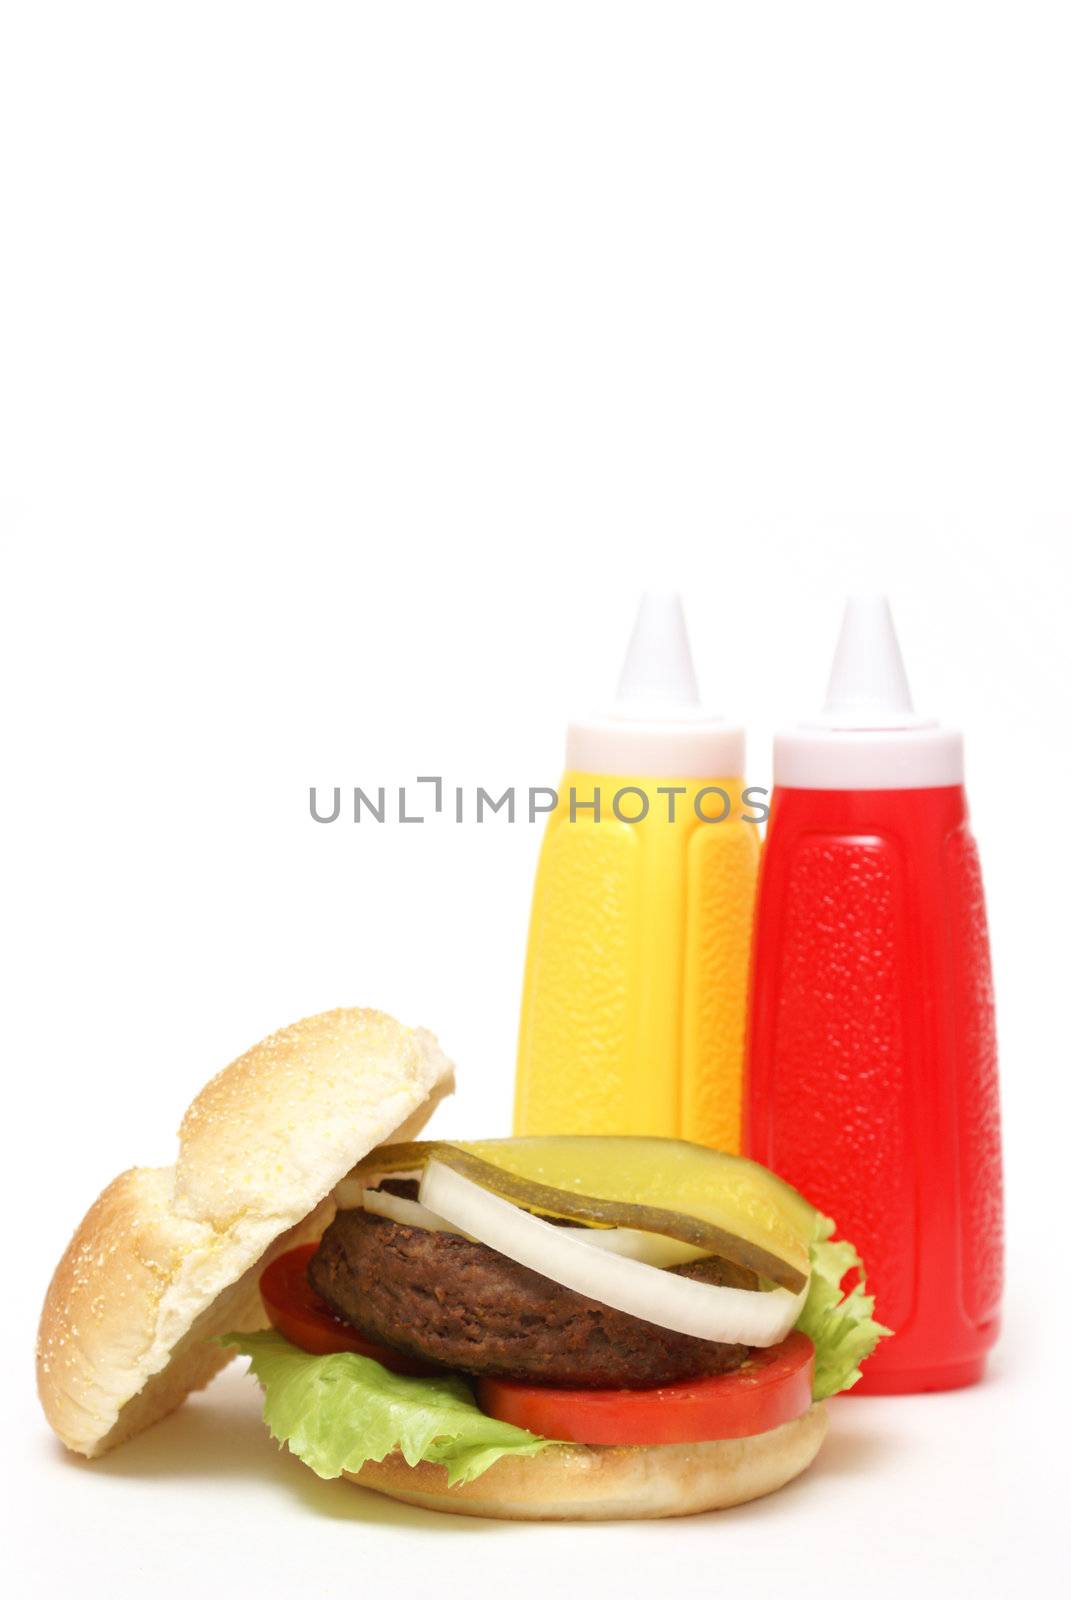 An isolated hamburger with mustard and ketchup bottles.